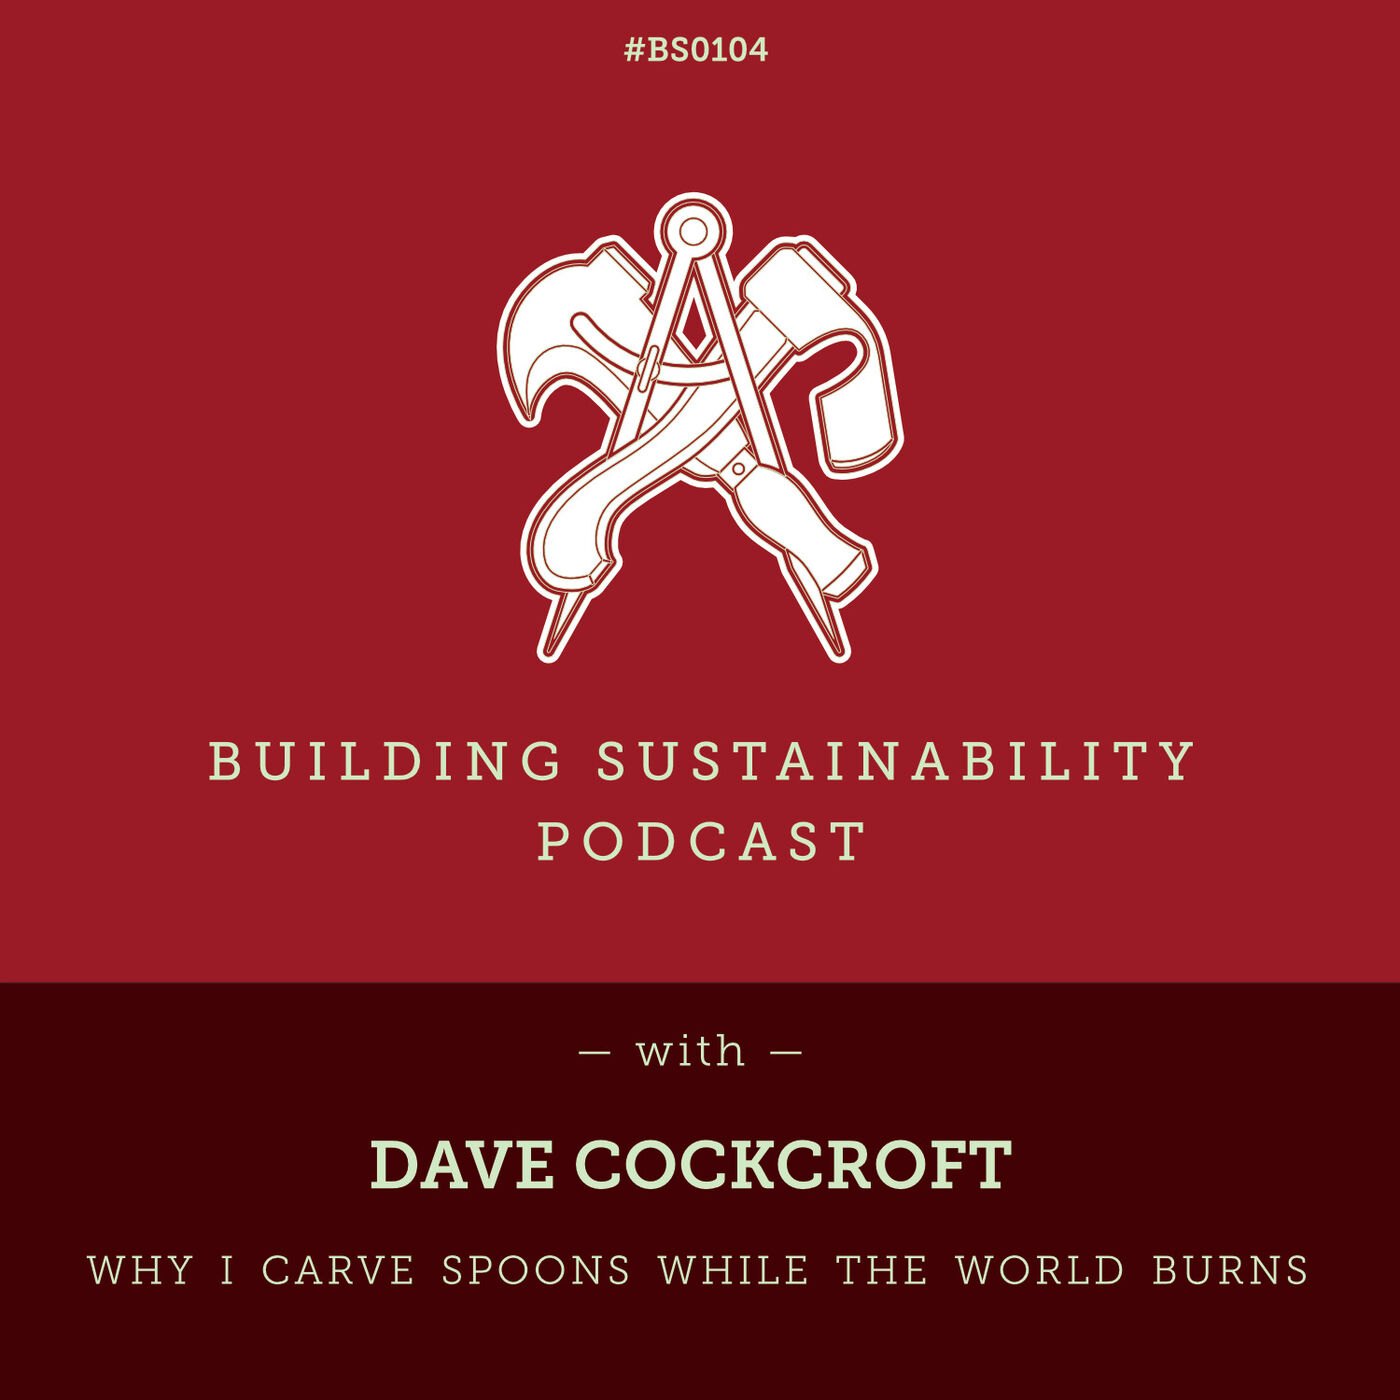 Why I carve spoons while the world burns - Dave Cockcroft - BS104